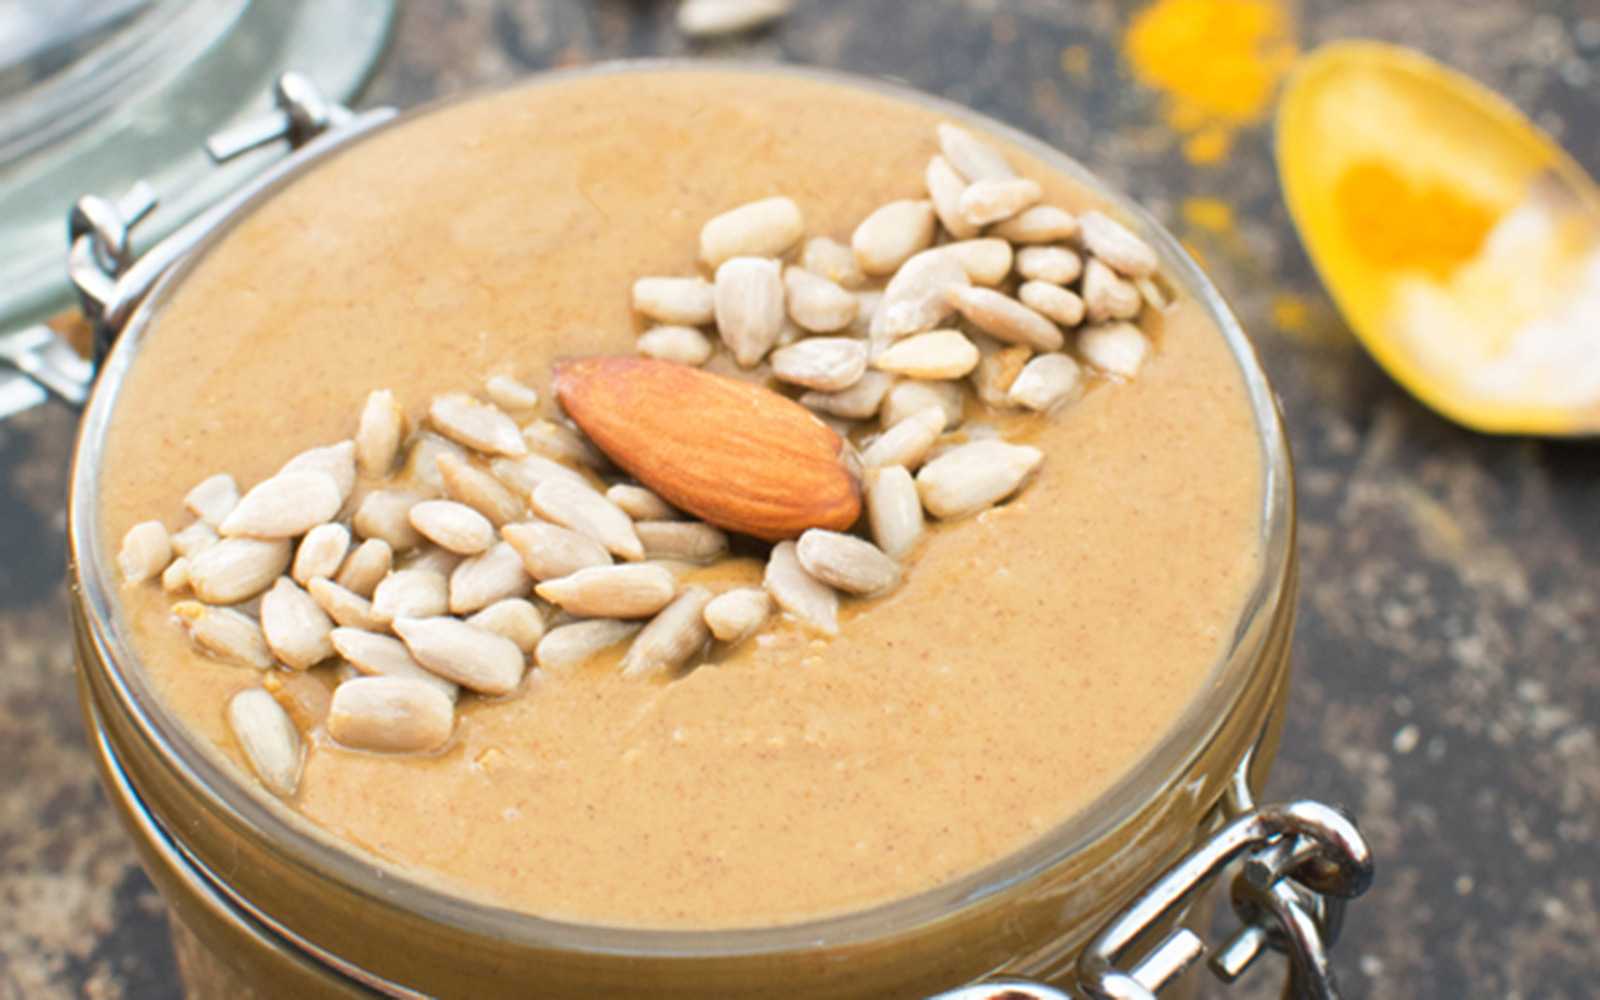 Maple Spiced Almond and Sunflower Seed Butter